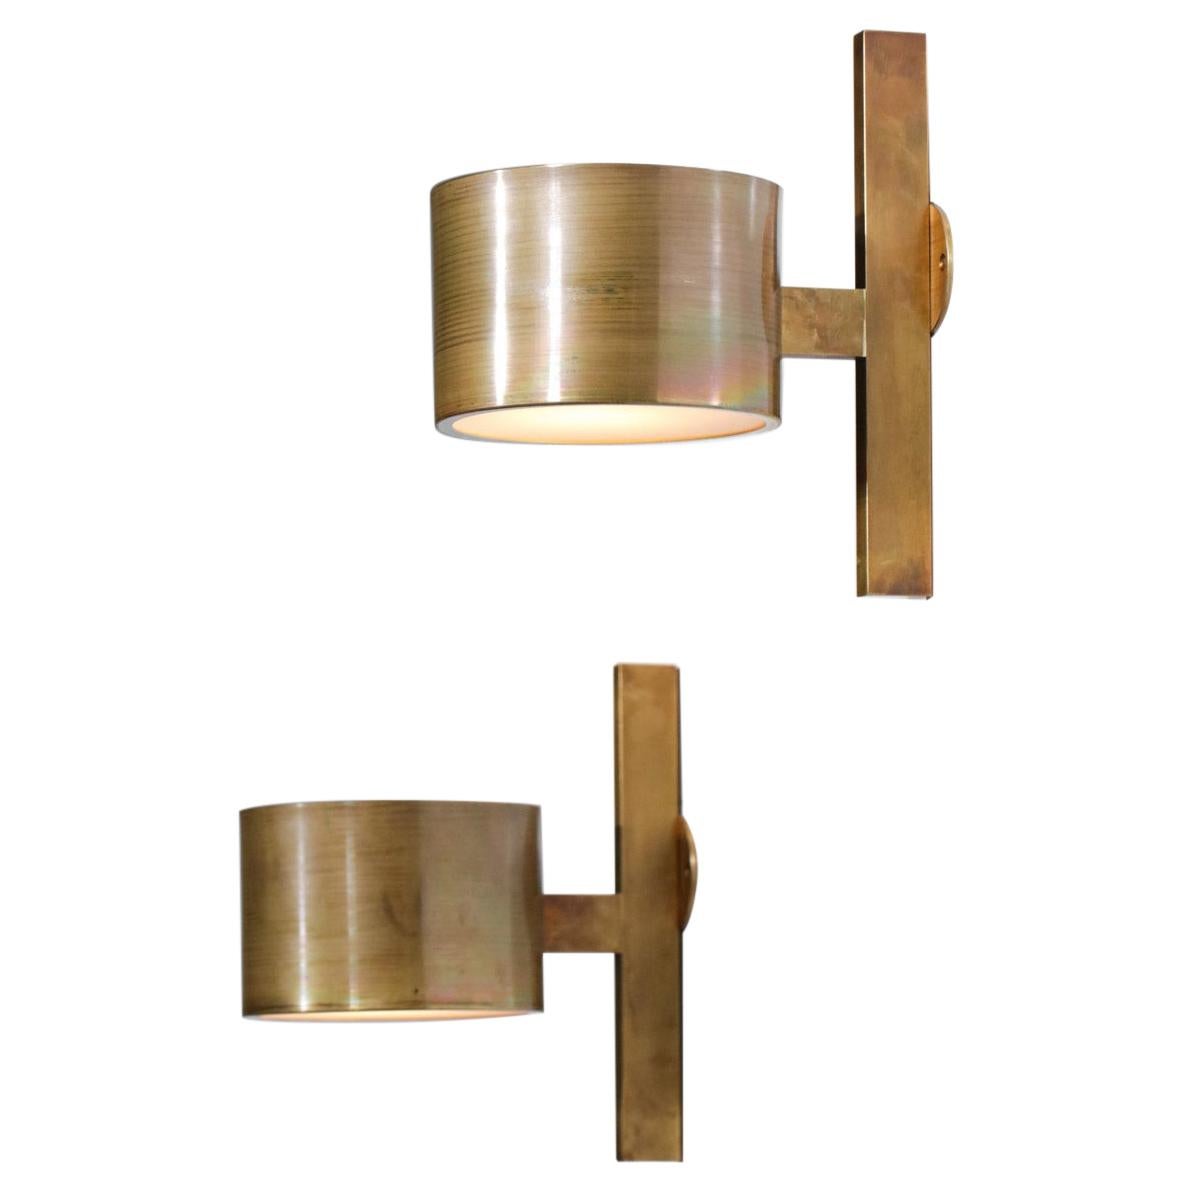 Pair of Modern Solid Brass Sconces in the Style of Hans Agne Jakobsson, EL135